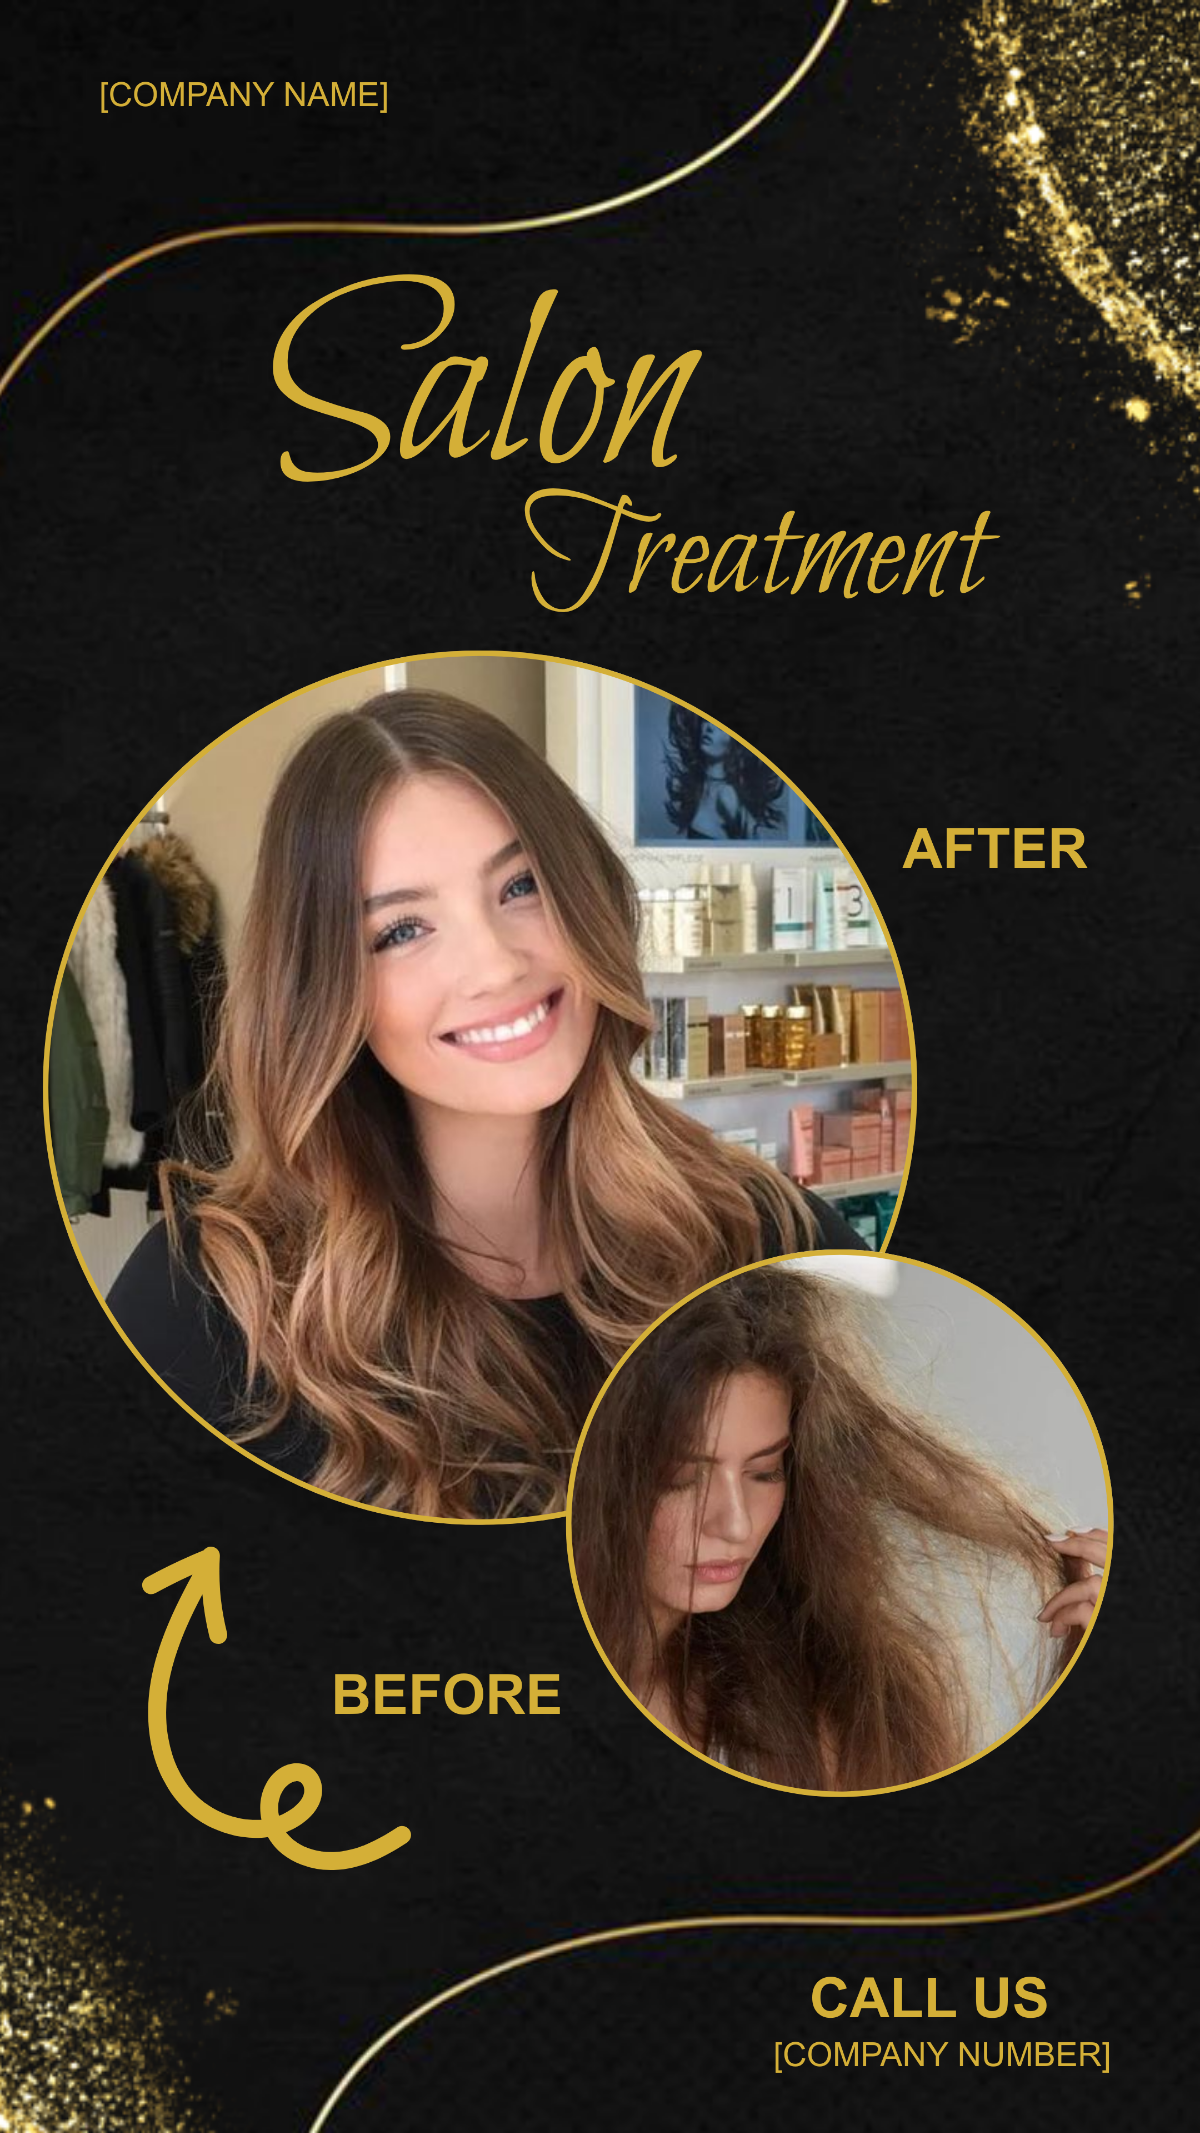 Before and After Salon Treatment Instagram Post